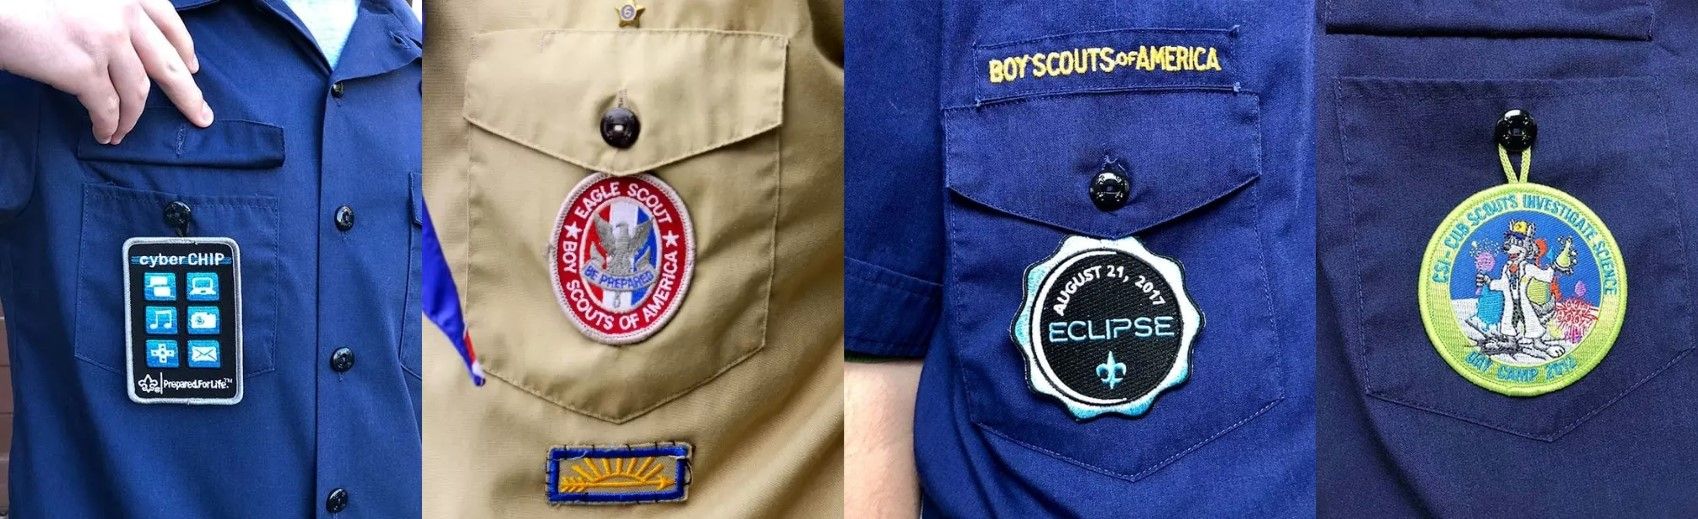 Showcase your journey and skills proudly with badges neatly arranged on your scout uniform.